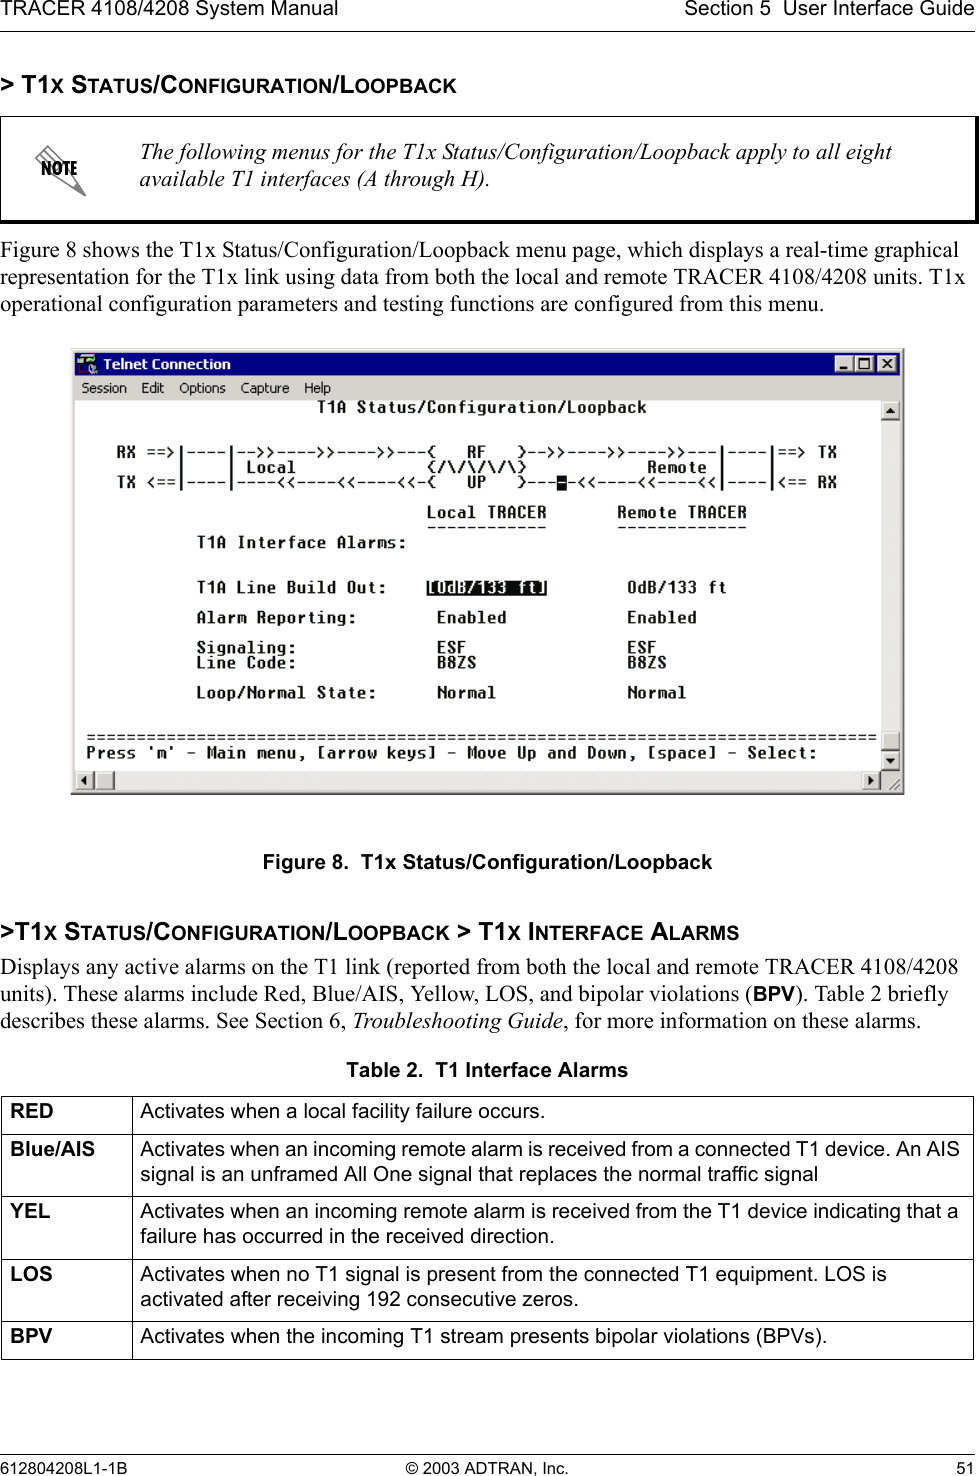 TRACER 4108/4208 System Manual Section 5  User Interface Guide612804208L1-1B © 2003 ADTRAN, Inc. 51&gt; T1X STATUS/CONFIGURATION/LOOPBACKFigure 8 shows the T1x Status/Configuration/Loopback menu page, which displays a real-time graphical representation for the T1x link using data from both the local and remote TRACER 4108/4208 units. T1x operational configuration parameters and testing functions are configured from this menu.Figure 8.  T1x Status/Configuration/Loopback&gt;T1X STATUS/CONFIGURATION/LOOPBACK &gt; T1X INTERFACE ALARMSDisplays any active alarms on the T1 link (reported from both the local and remote TRACER 4108/4208 units). These alarms include Red, Blue/AIS, Yellow, LOS, and bipolar violations (BPV). Table 2 briefly describes these alarms. See Section 6, Troubleshooting Guide, for more information on these alarms.The following menus for the T1x Status/Configuration/Loopback apply to all eight available T1 interfaces (A through H).Table 2.  T1 Interface AlarmsRED Activates when a local facility failure occurs.Blue/AIS Activates when an incoming remote alarm is received from a connected T1 device. An AIS signal is an unframed All One signal that replaces the normal traffic signalYEL Activates when an incoming remote alarm is received from the T1 device indicating that a failure has occurred in the received direction.LOS Activates when no T1 signal is present from the connected T1 equipment. LOS is activated after receiving 192 consecutive zeros.BPV Activates when the incoming T1 stream presents bipolar violations (BPVs).